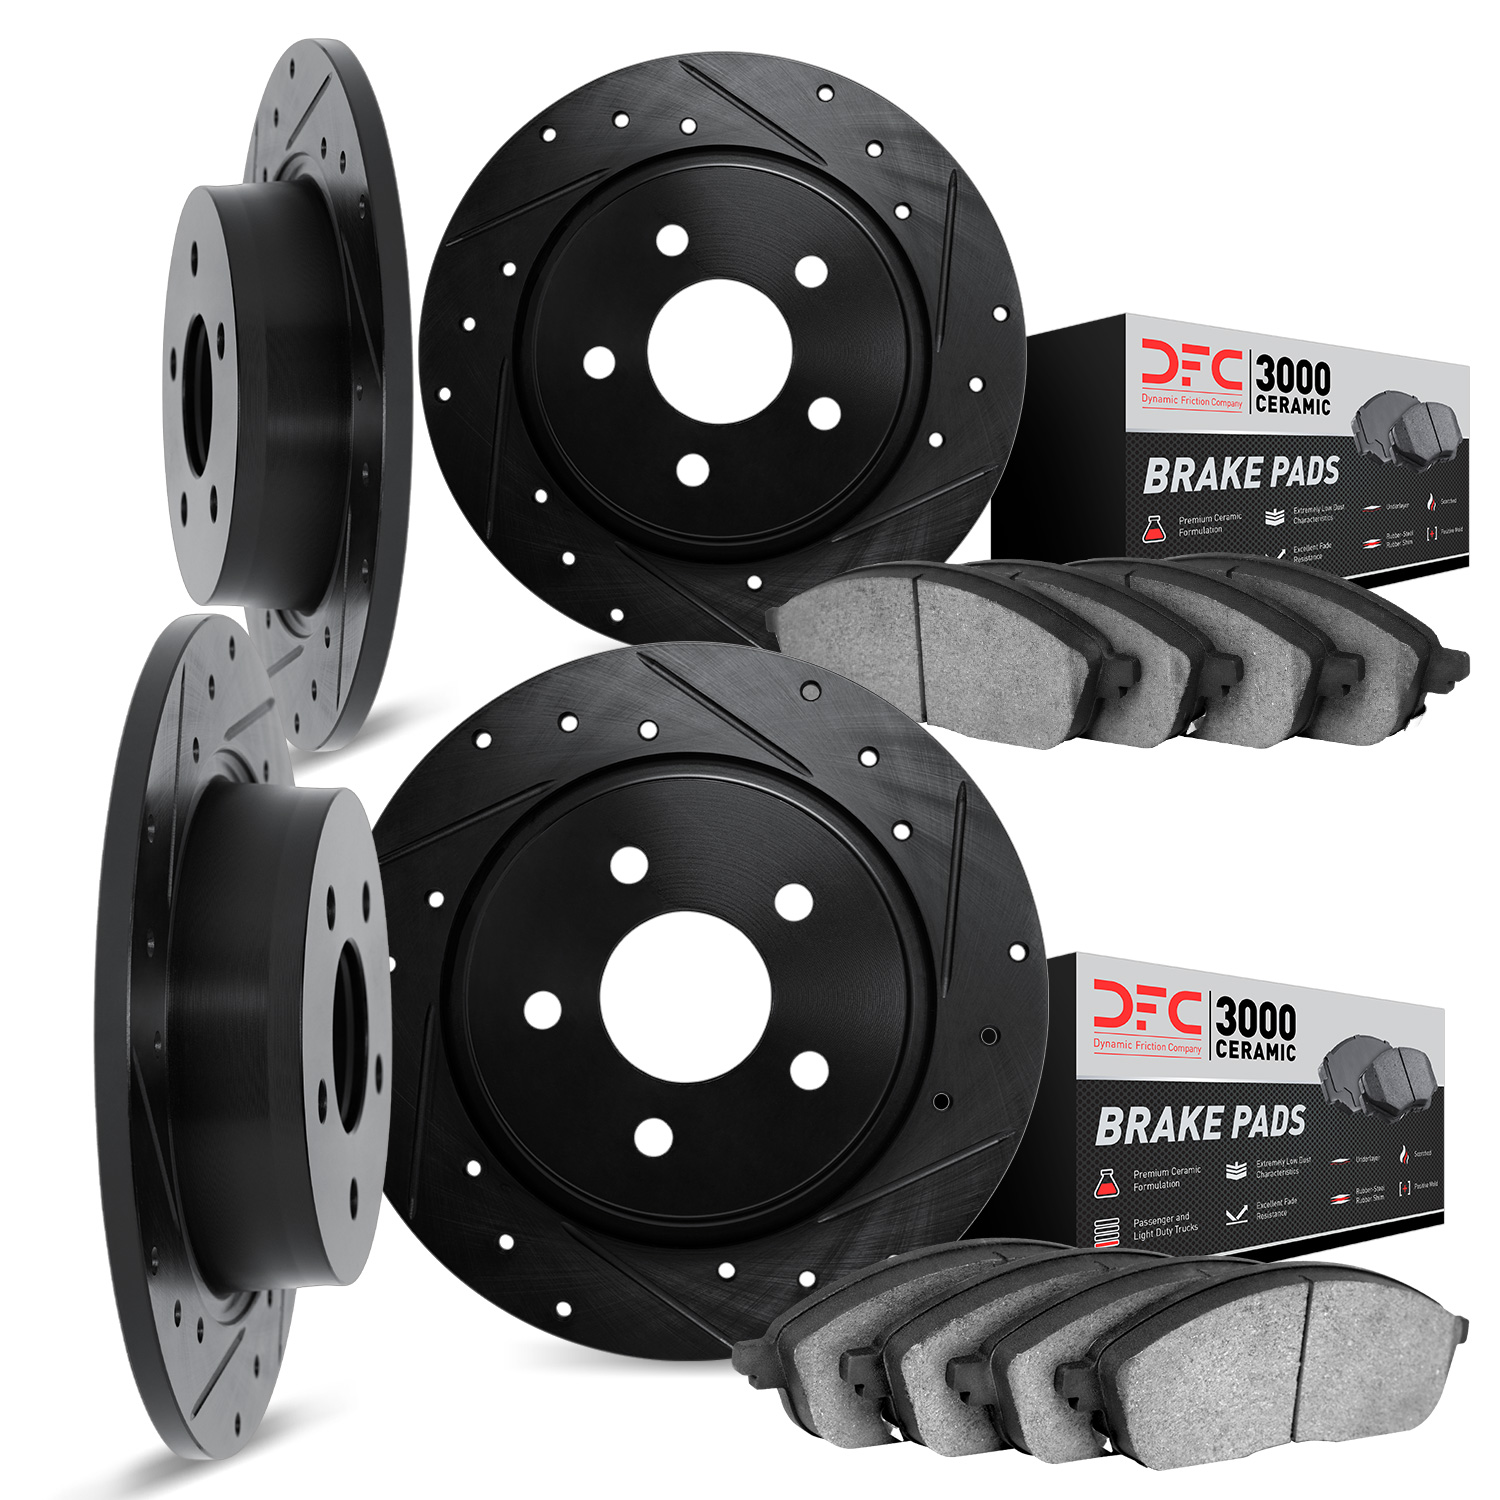 8304-27008 Drilled/Slotted Brake Rotors with 3000-Series Ceramic Brake Pads Kit [Black], 1975-1987 Volvo, Position: Front and Re